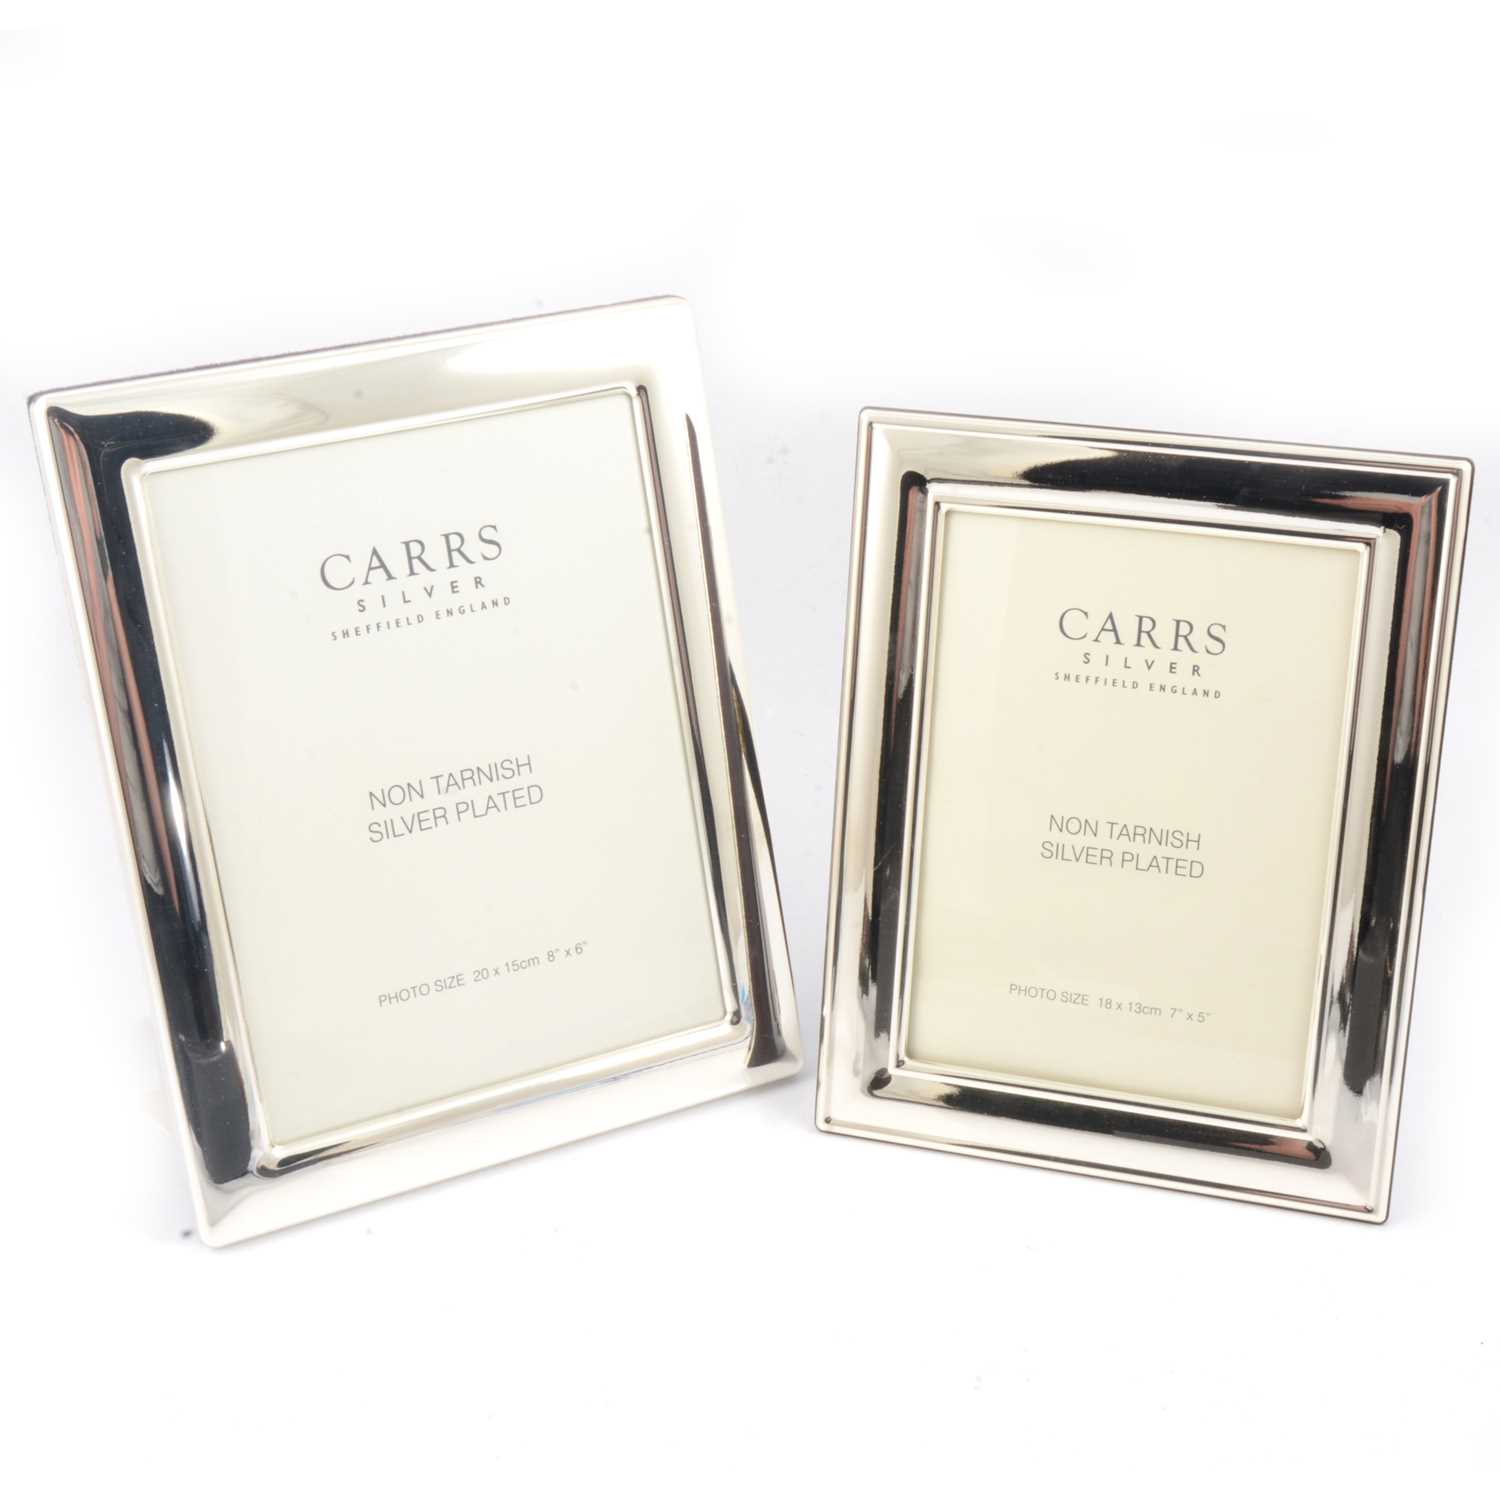 Lot 189 - Carr's of Sheffield Ltd, two large silver-plated photograph frames, new and boxed.